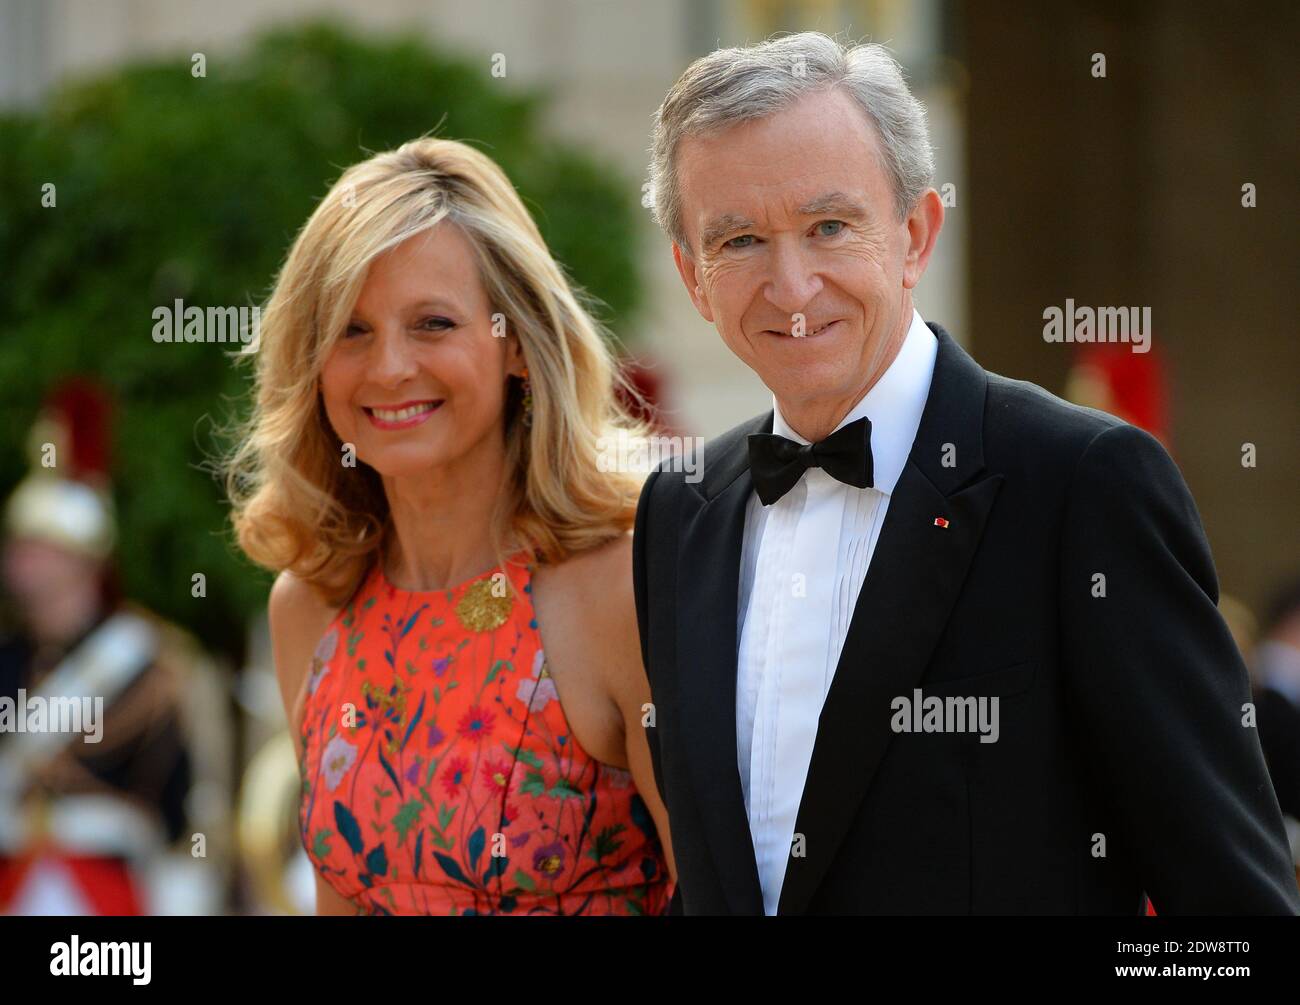 Bernard Arnault and Helene Arnault attend the State Banquet given in honour of HM The Queen Elizabeth II by French President Francois Hollande at the Elysee Palace, as part of the official ceremonies of the 70th Anniversary of the D Day, on June 6, 2014, in Paris, France. Photo by Christian Liewig/ABACAPRESS.COM Stock Photo